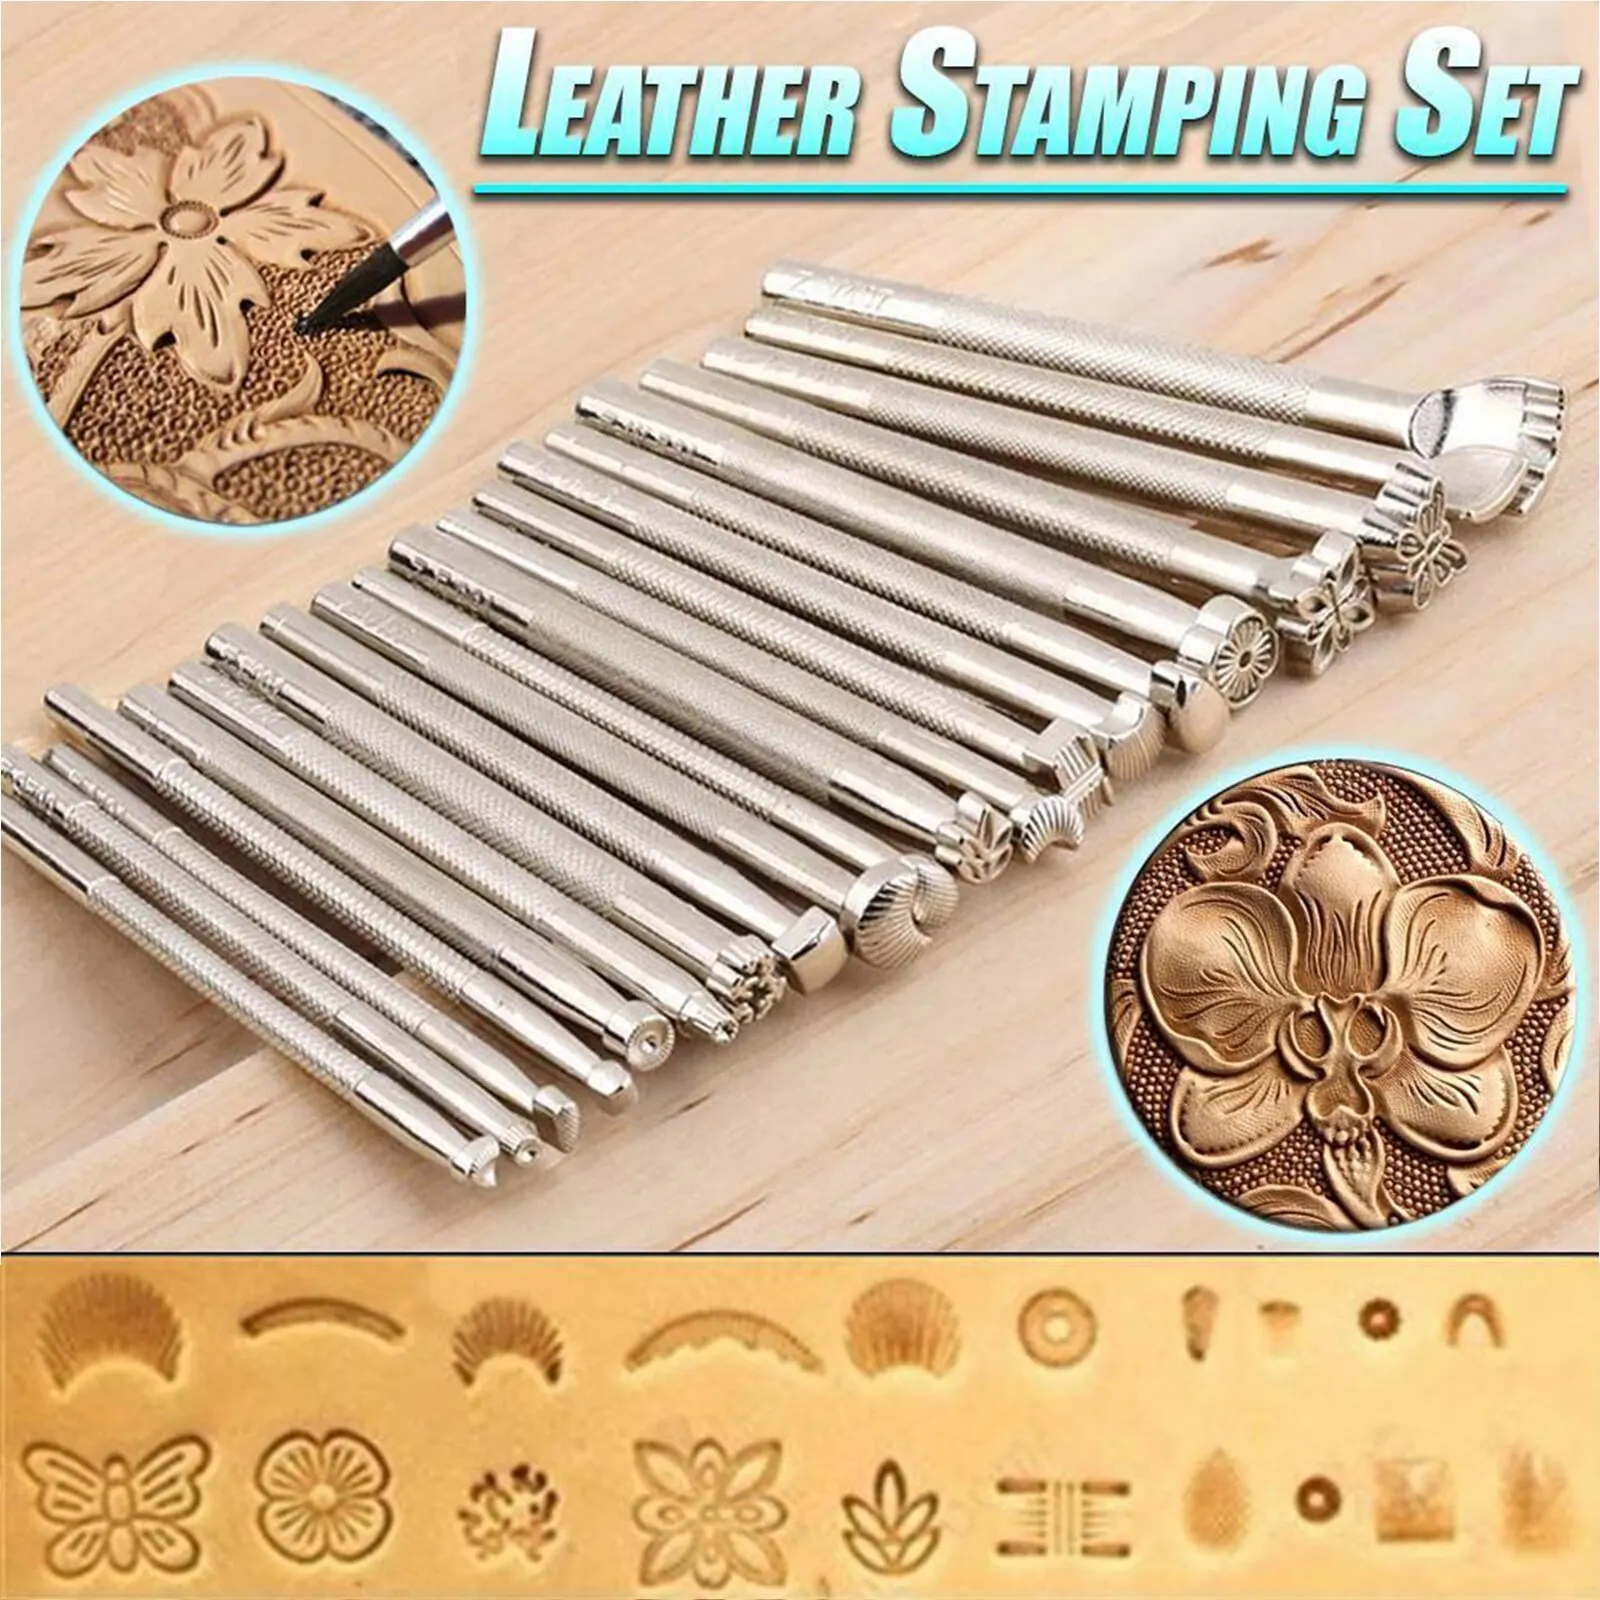 Stamp tool Leather crafting crafts brass saddle making stamps  #368Kit 